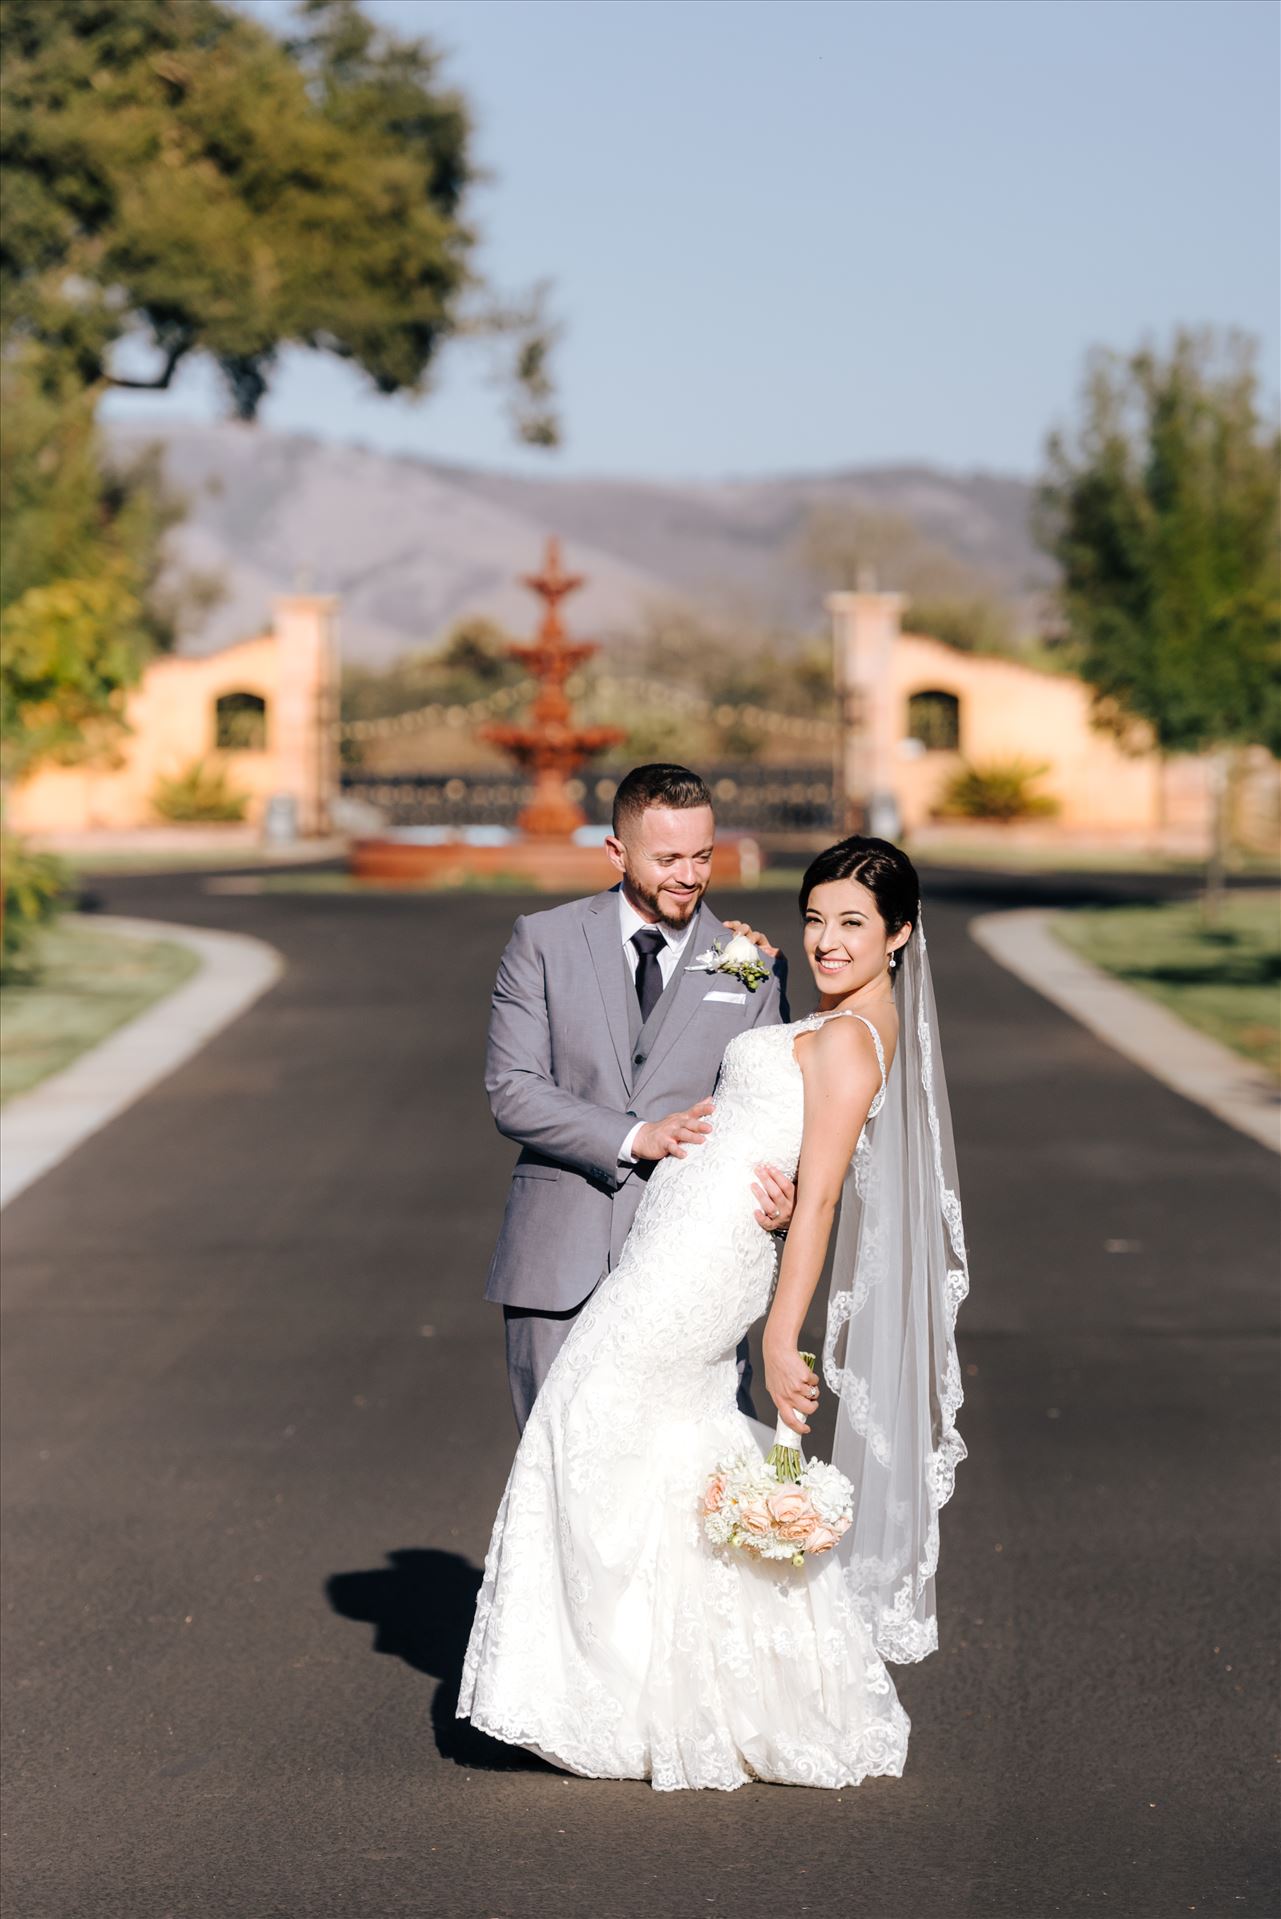 FW-5336.JPG - Arroyo Grande California Country Chic and Elegant wedding by Mirror's Edge Photography, San Luis Obispo County Wedding Photographer.  Bride and Groom at A&C Ranch. by Sarah Williams